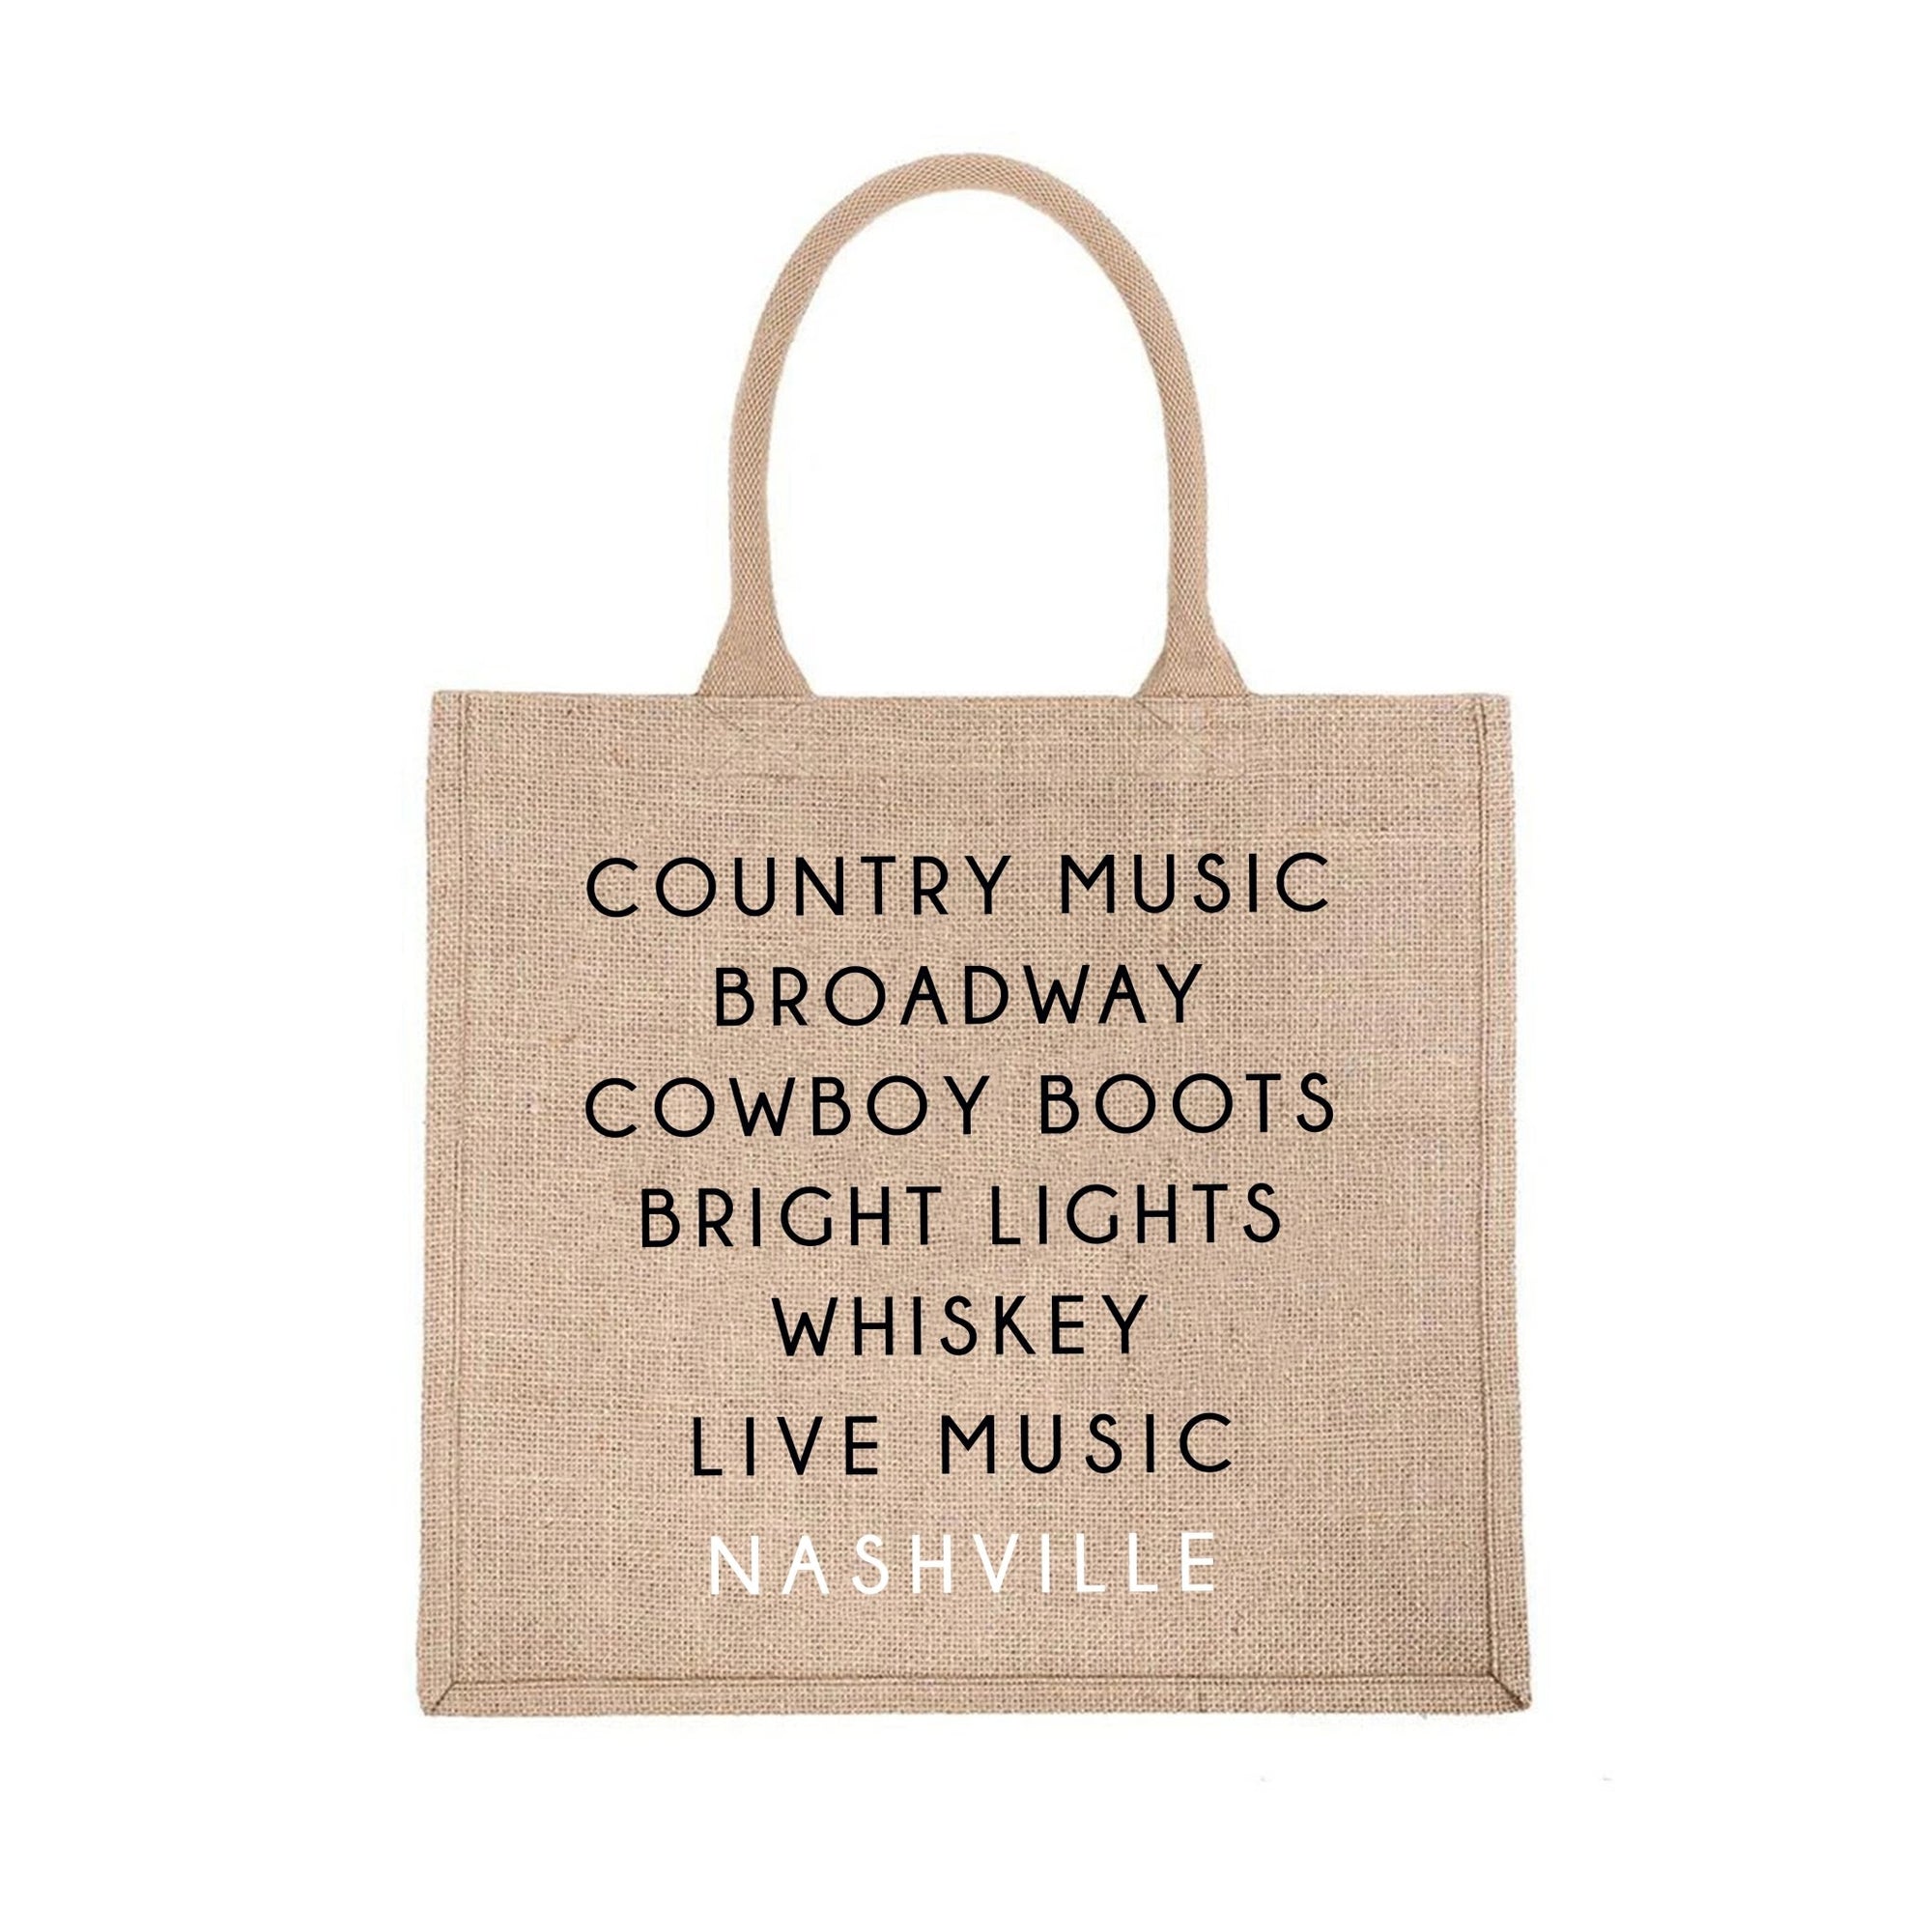 A jute carryall tote customized with sayings about Nashville